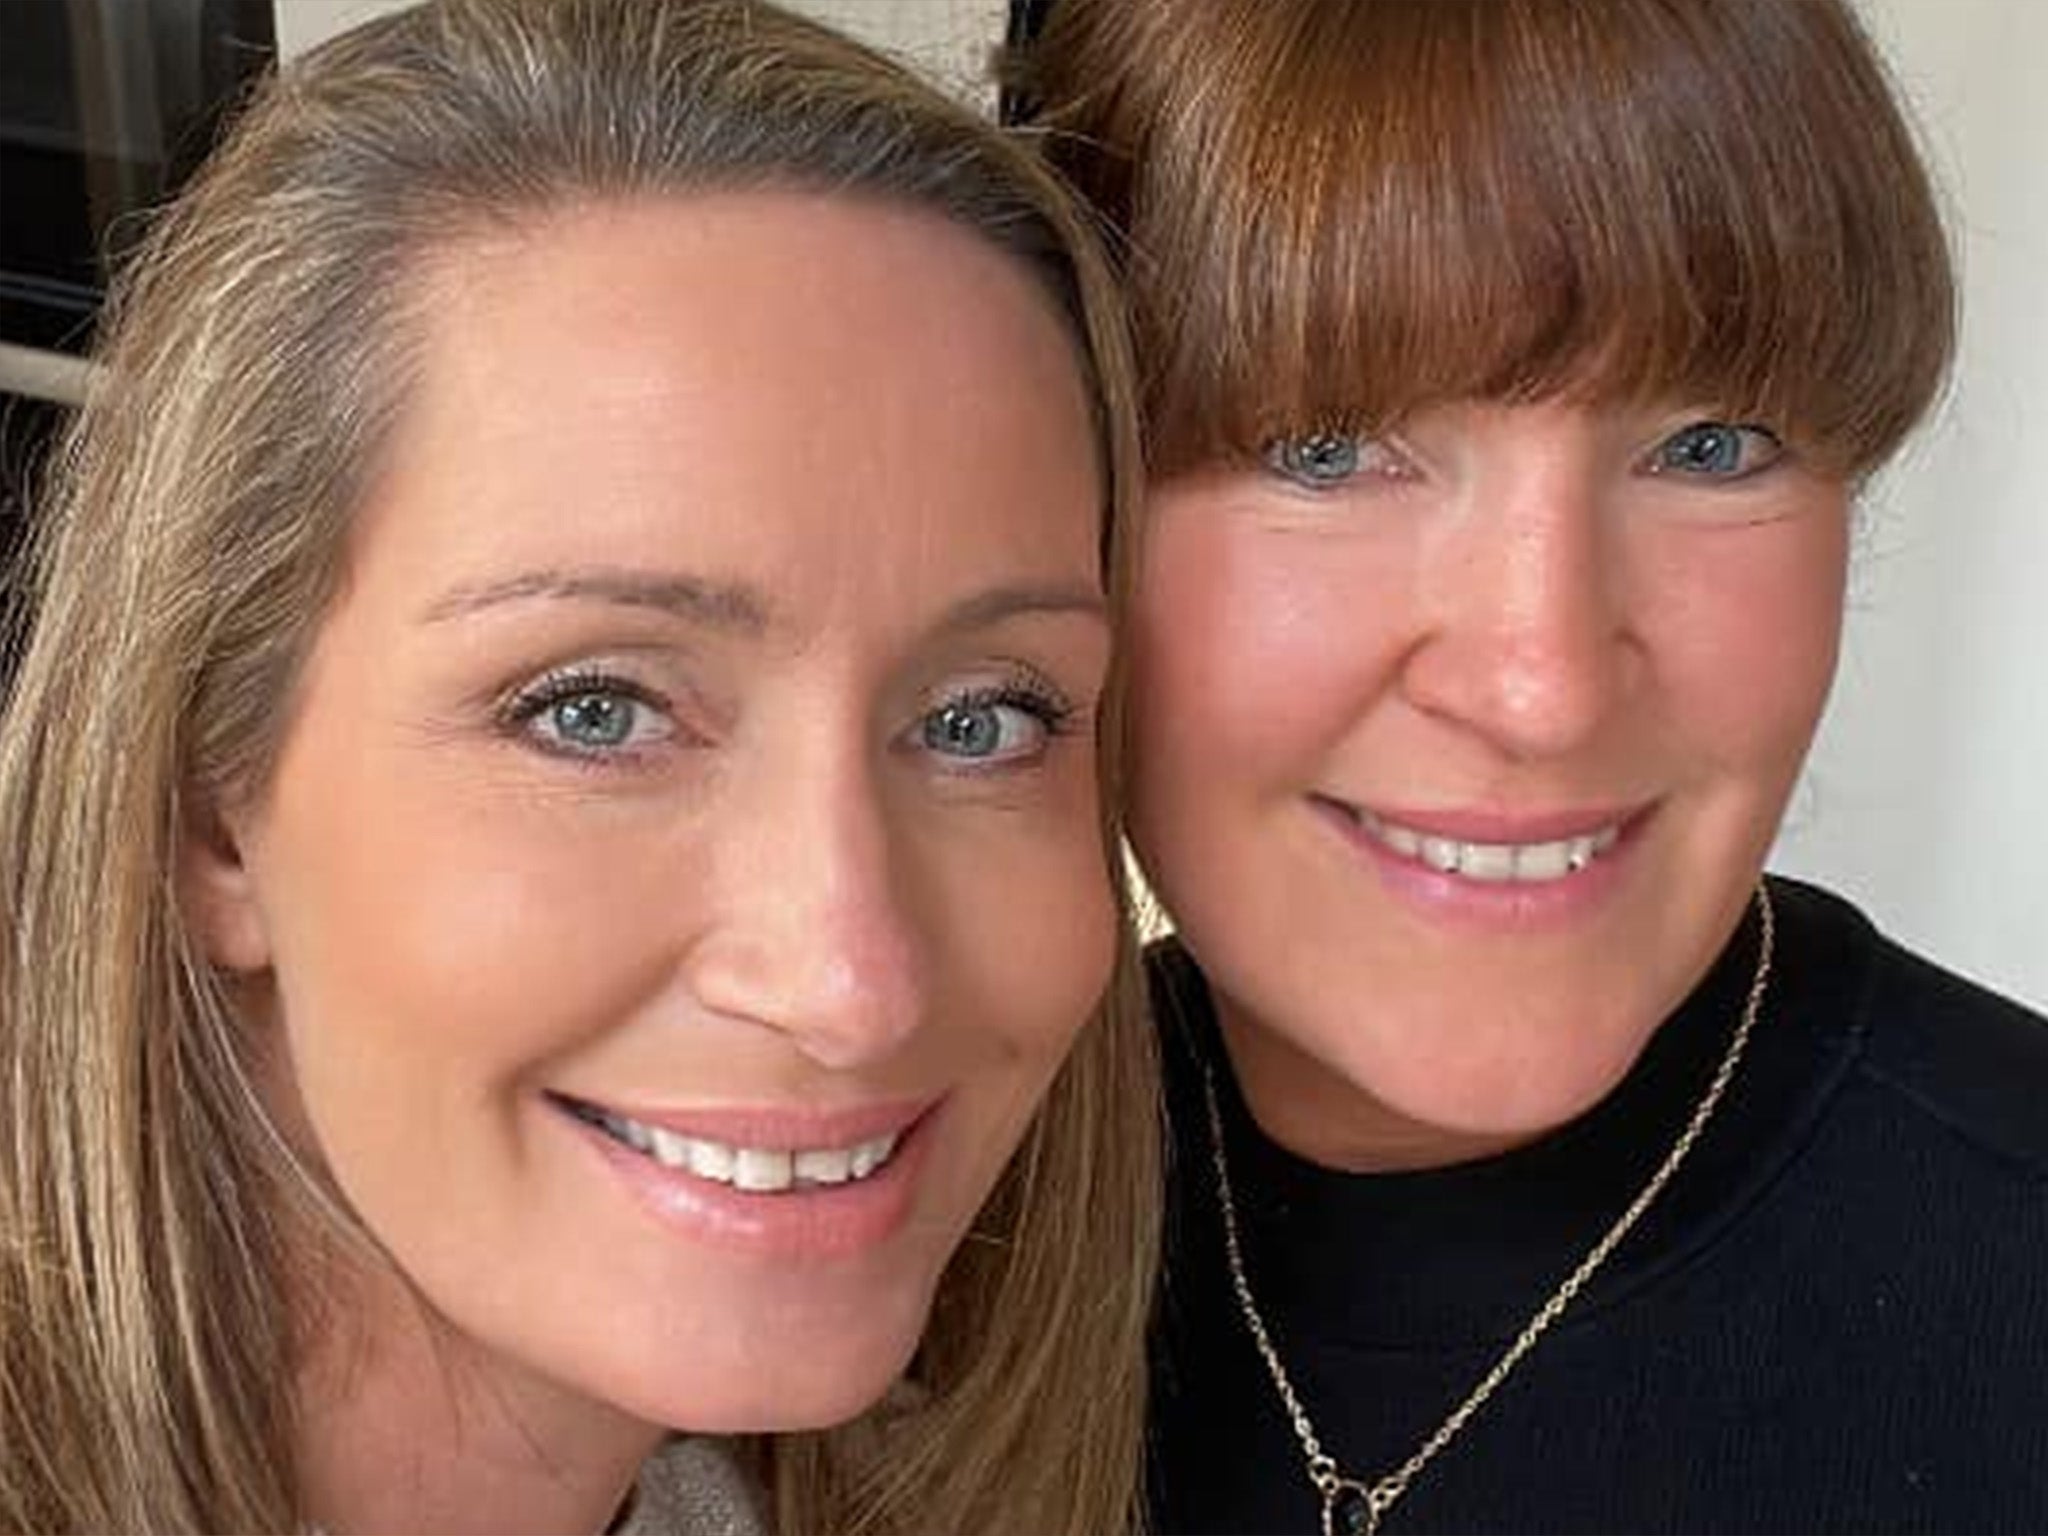 Ms Bulley’s sister Louise Cunningham (R) has urged people to keep an open mind about her disappearance